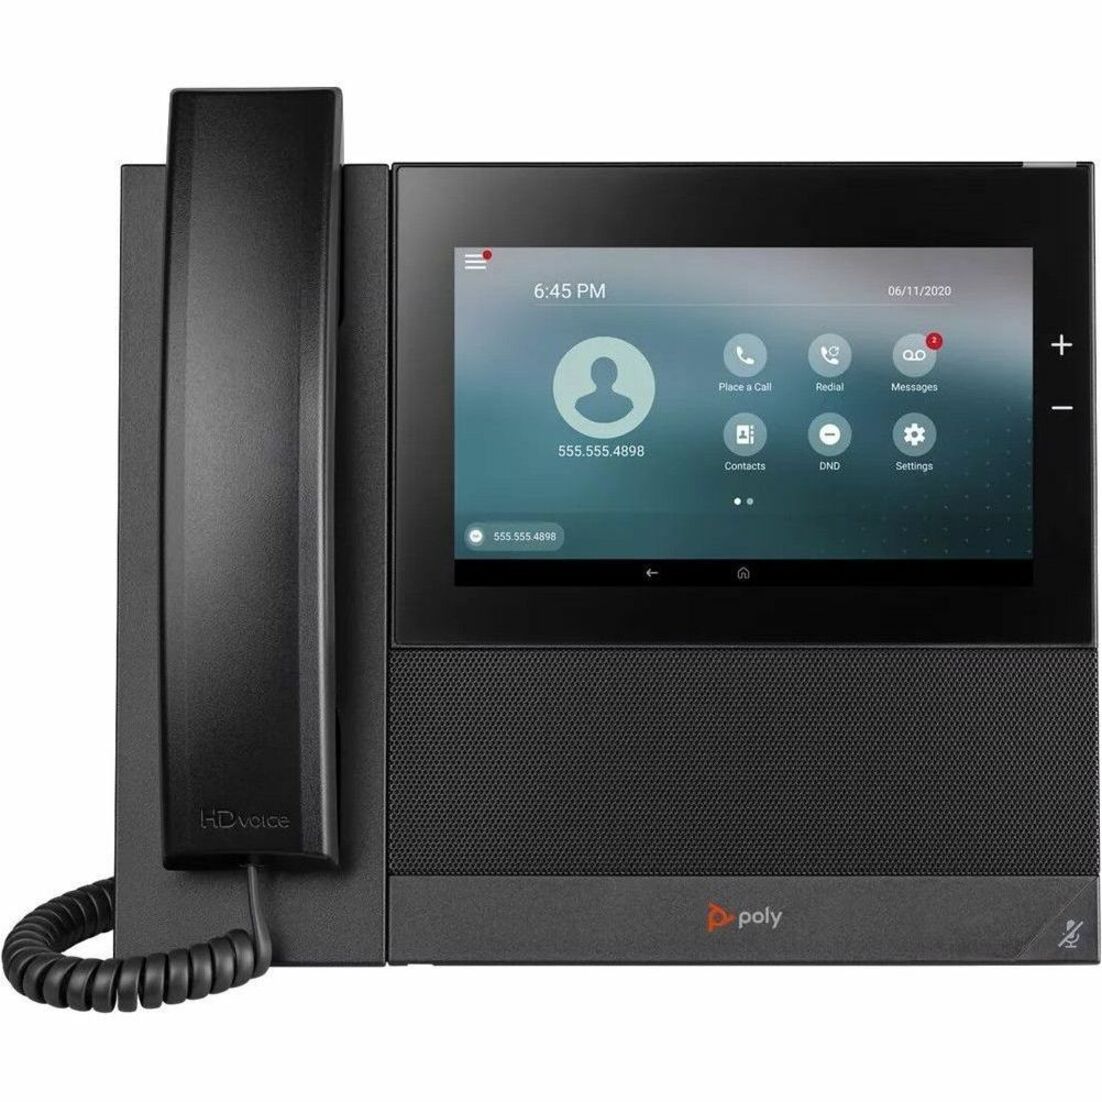 Poly 600 IP Phone - Corded - Corded - Wi-Fi - Desktop (2200-49780-001)